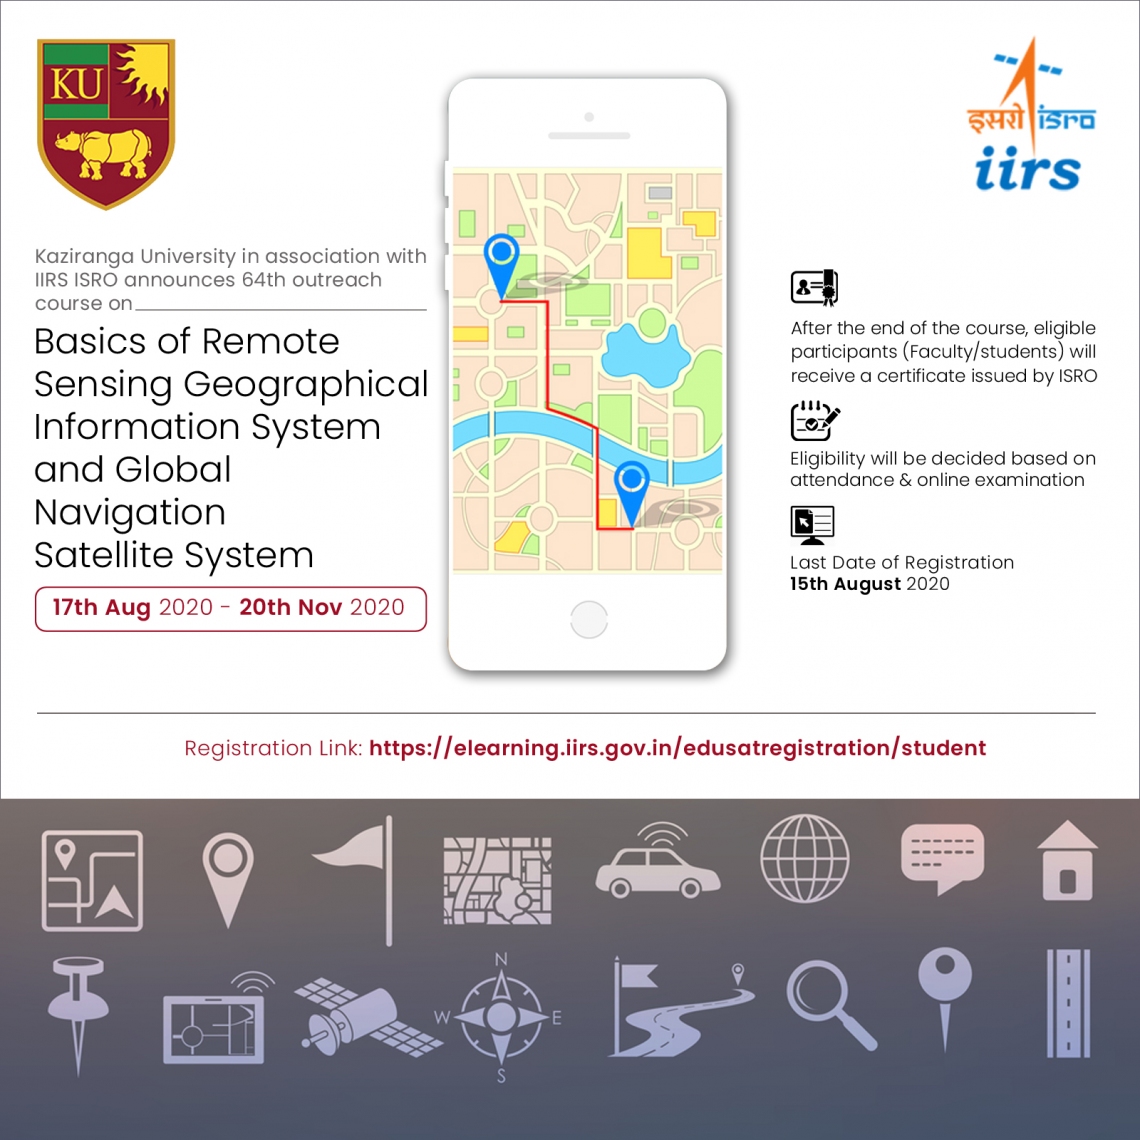 Kaziranga University, in partnership with IIRS ISRO announces its 64th outreach course on "Basics of Remote Sensing Geographical Information System and Global Navigation Satellite System"